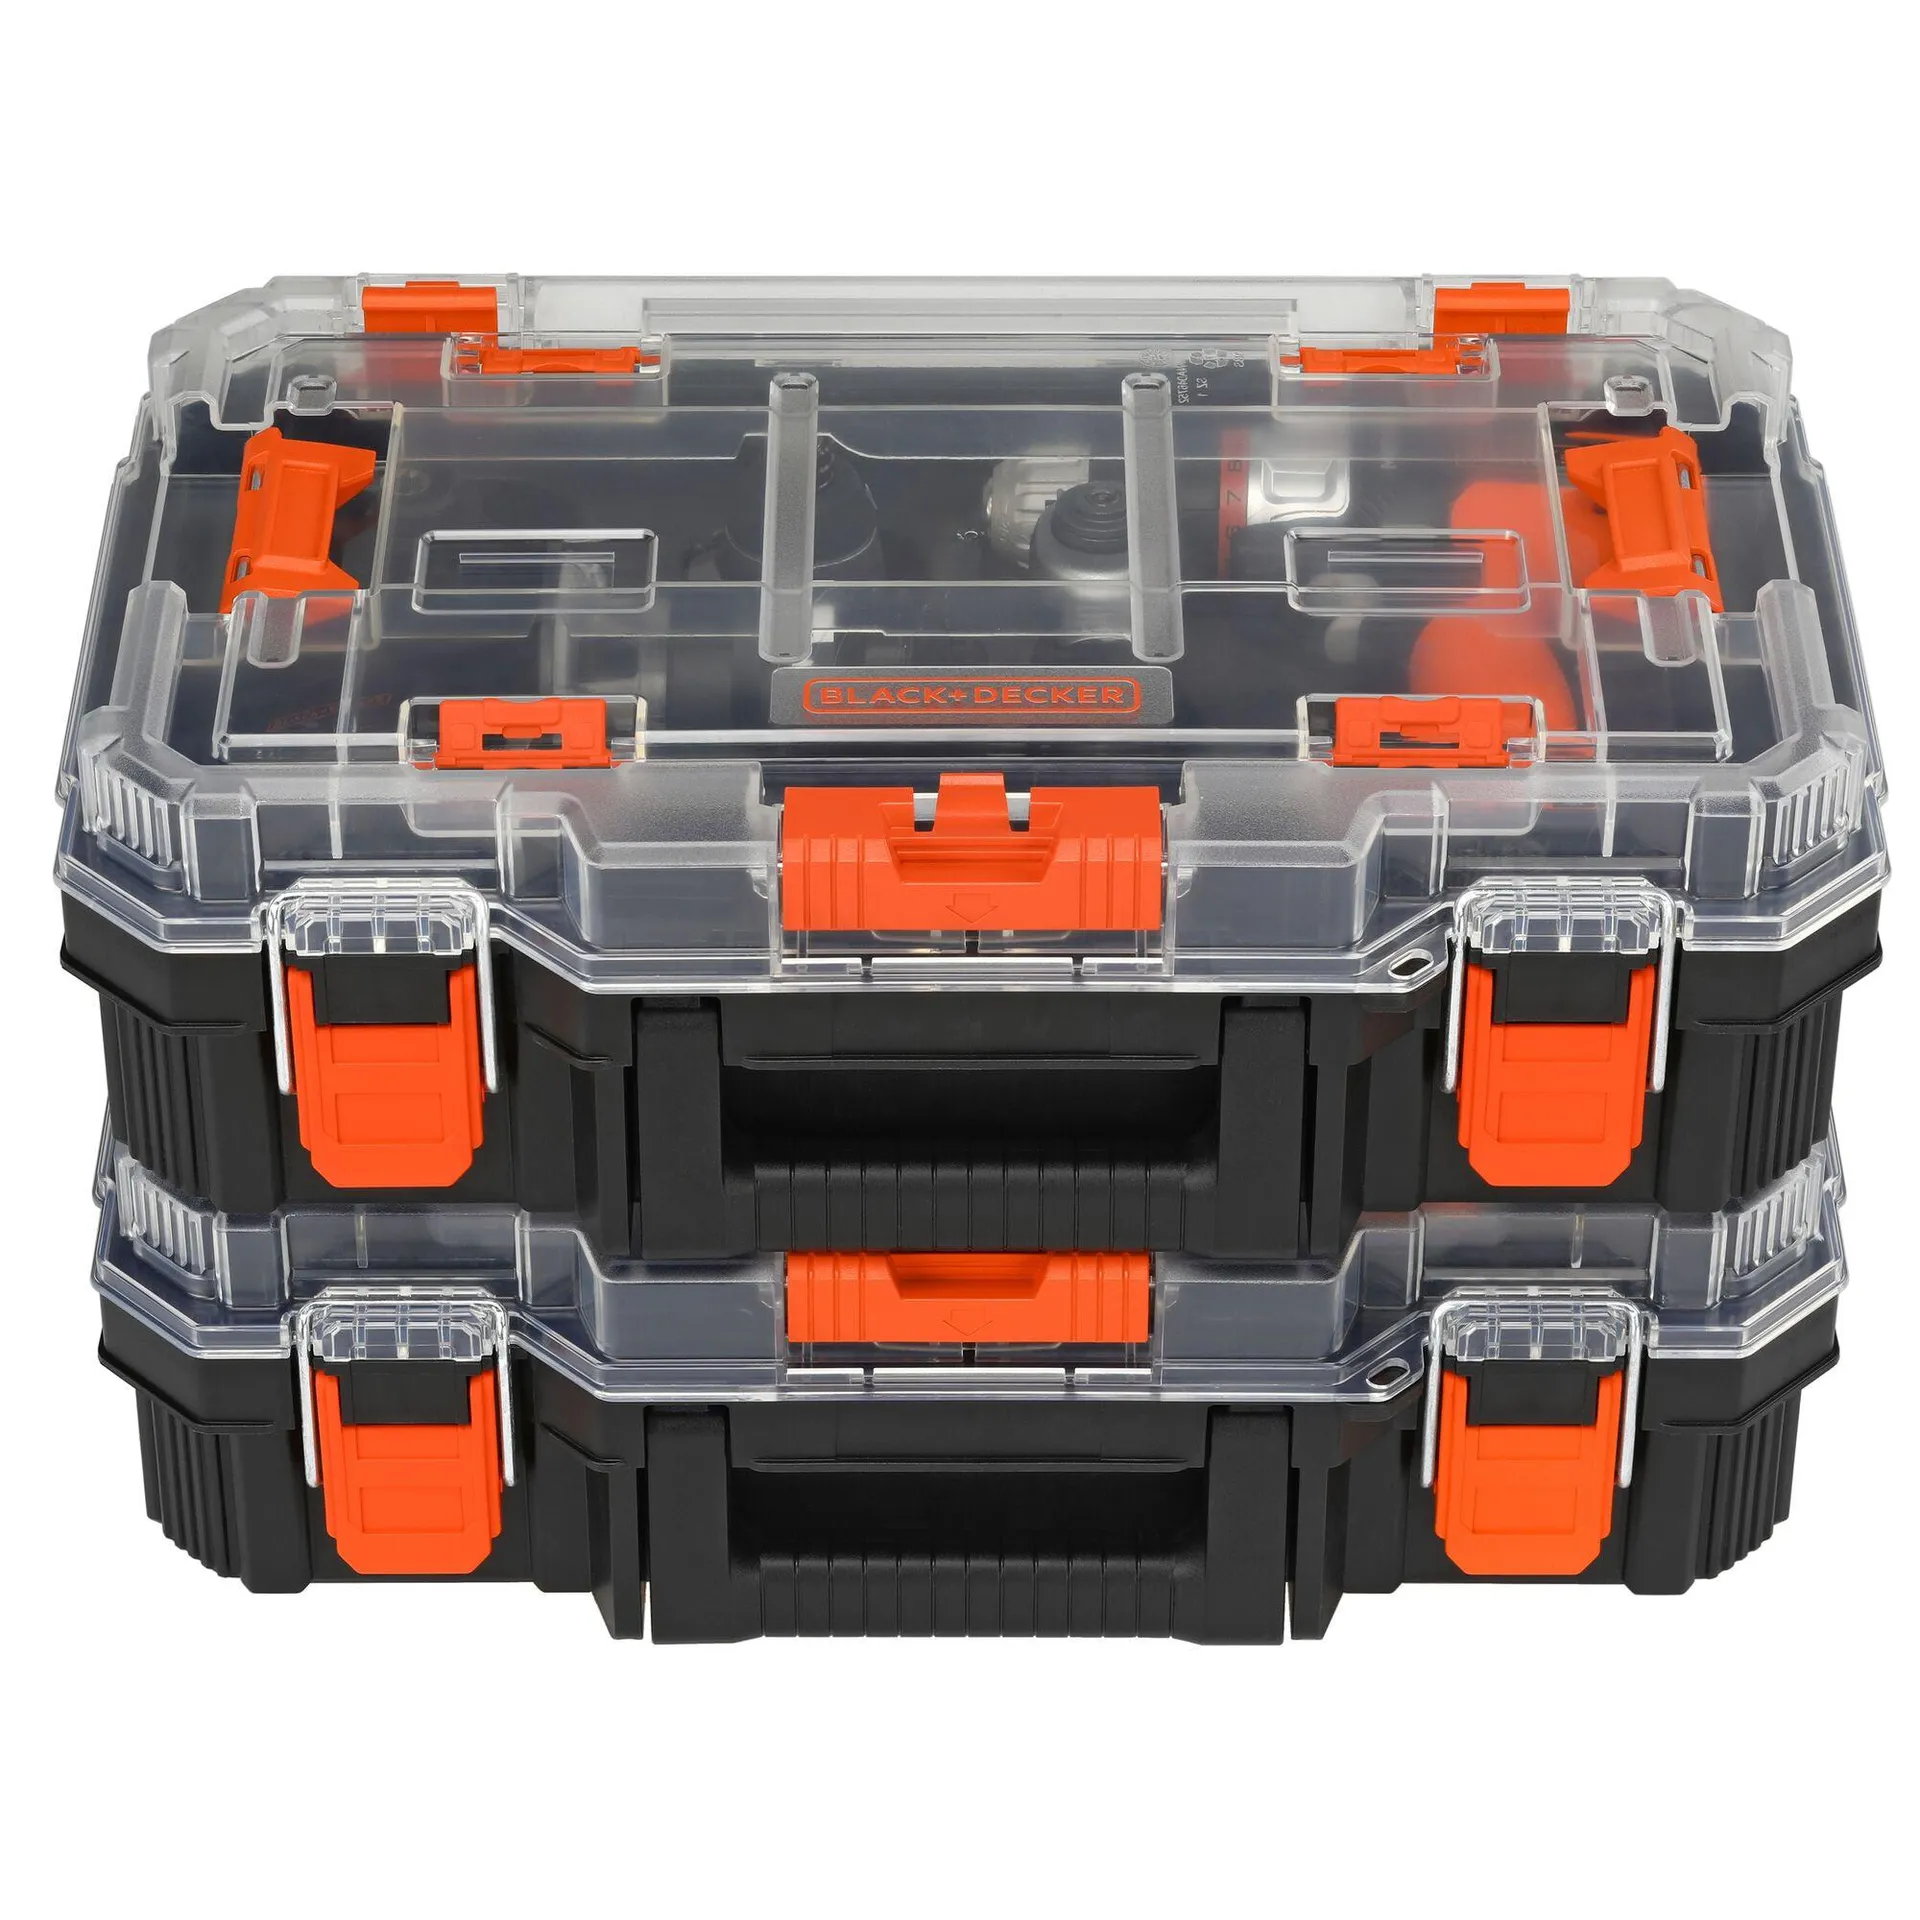 MATRIX™ 20V MAX* Power Tool Kit, Includes Cordless Drill, 12 Attachments and Storage Case